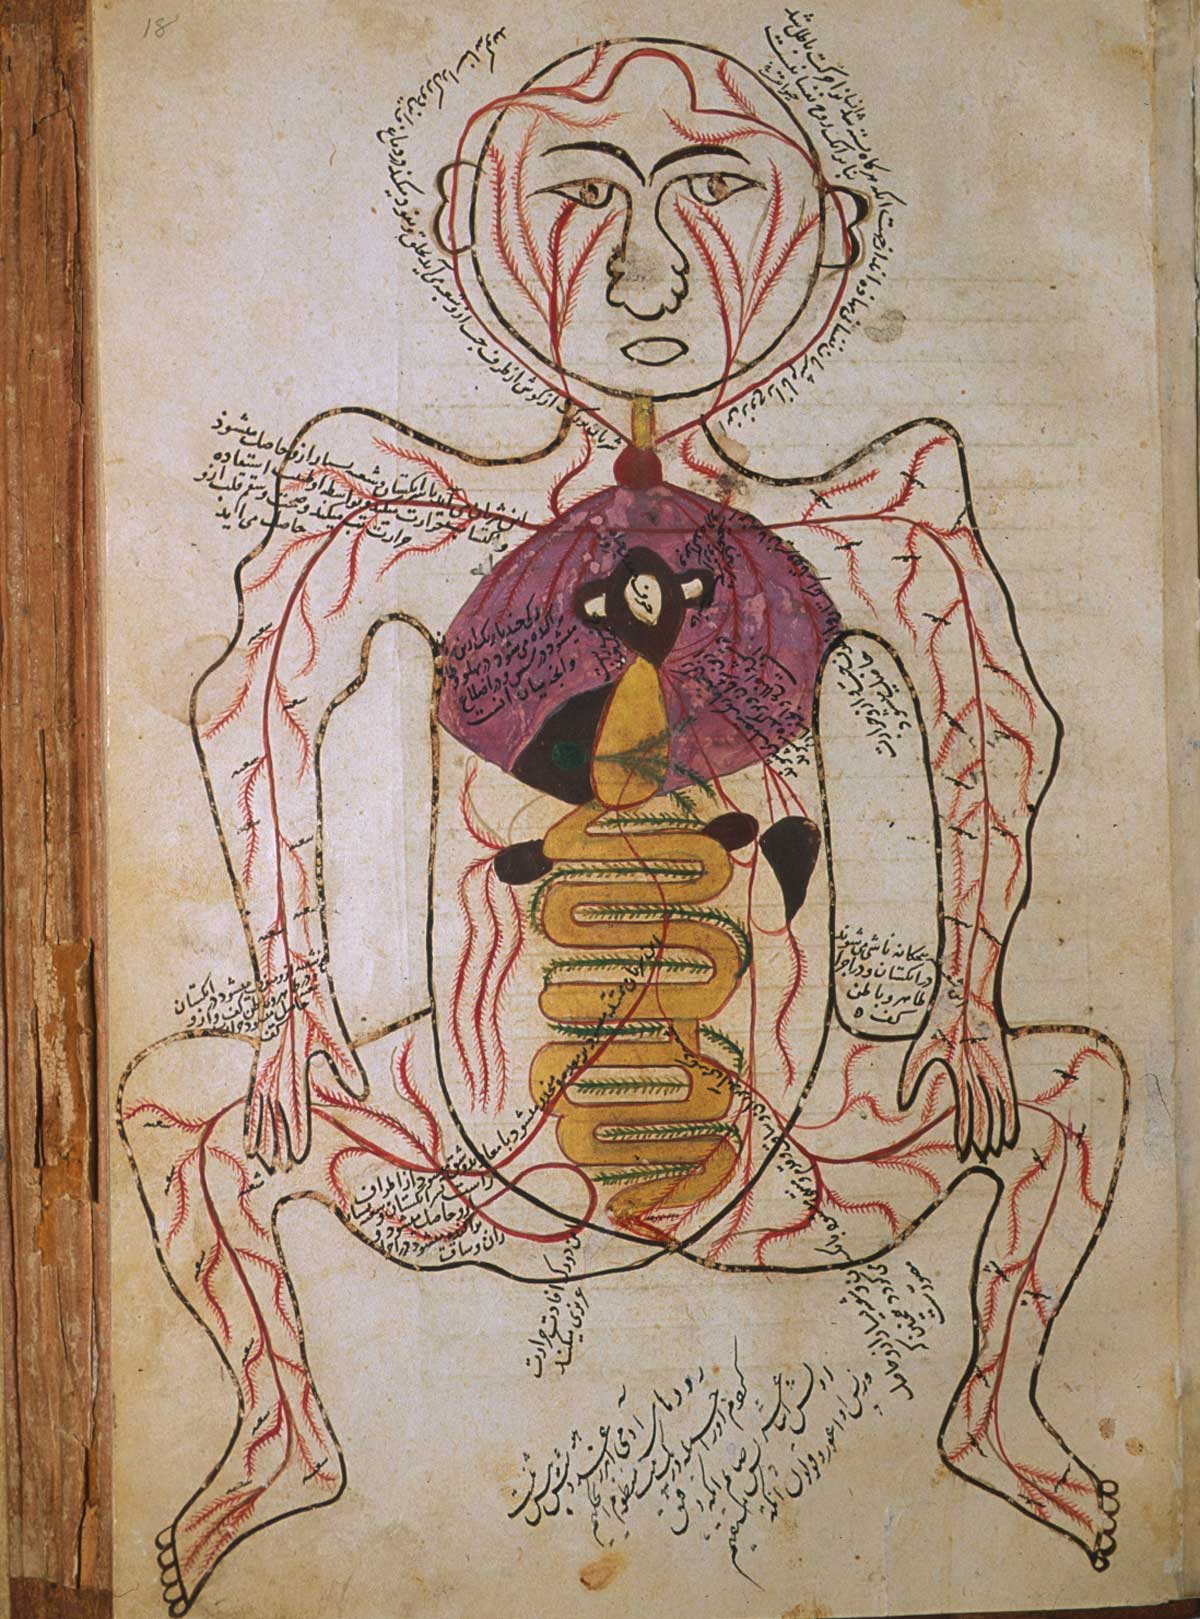 Folio 18a of Mansur ibn Ilyas' Tashrih-i badan-i insan, featuring the arterial figure, shown frontally with the internal organs indicated in opaque watercolor.